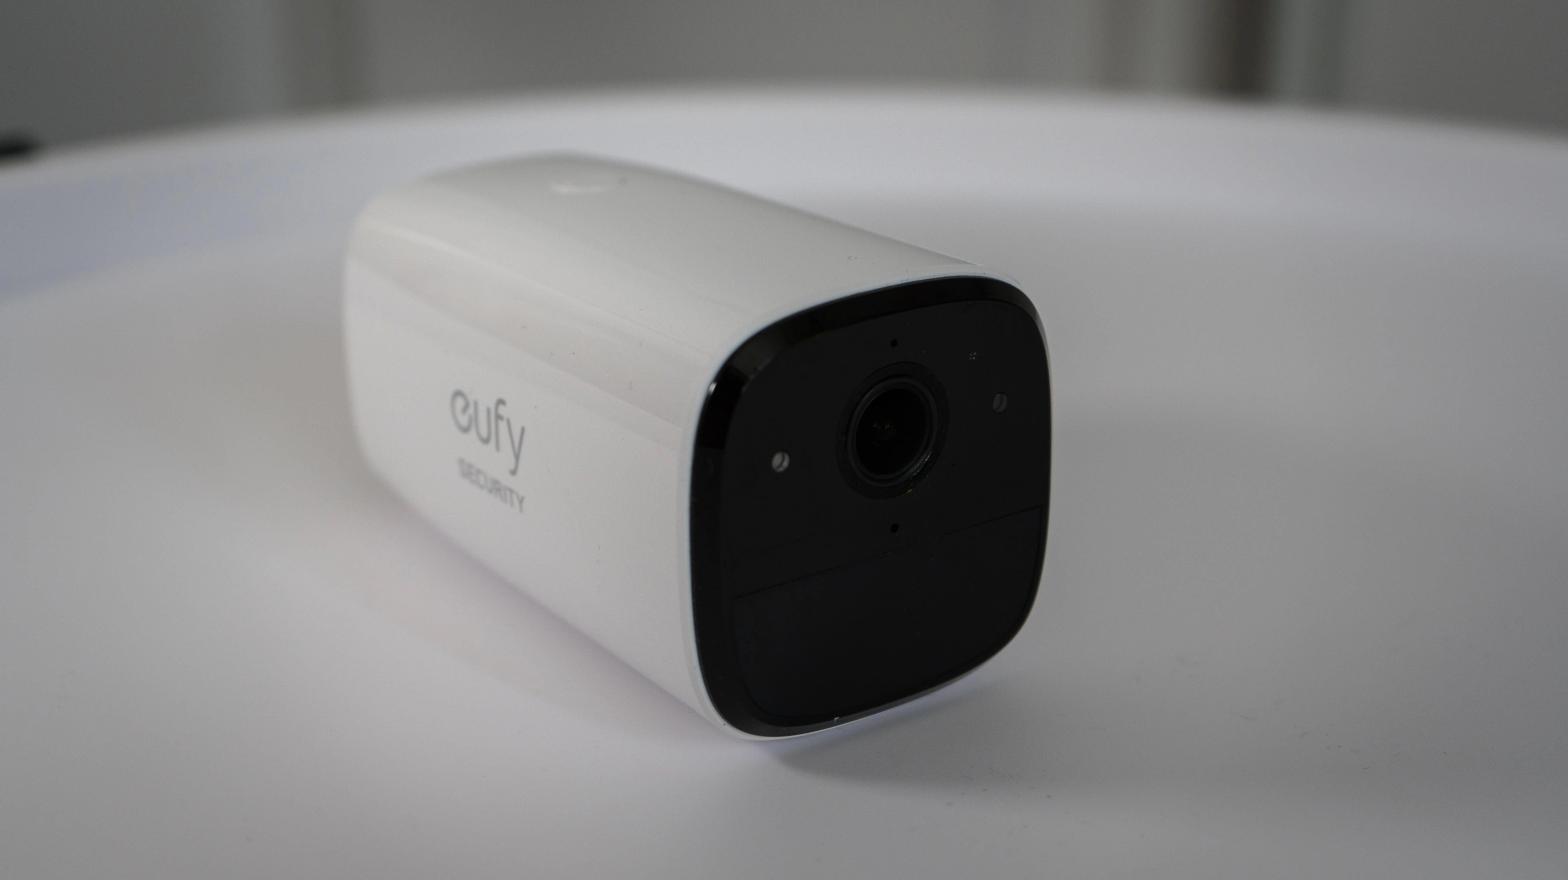 The Eufy SoloCam E40 is just one security product made by Eufy that can livestream to users' phones or its web portal. Now the company has admitted its livestreams were never as encrypted as the company promised. (Photo: Florence Ion/Gizmodo)